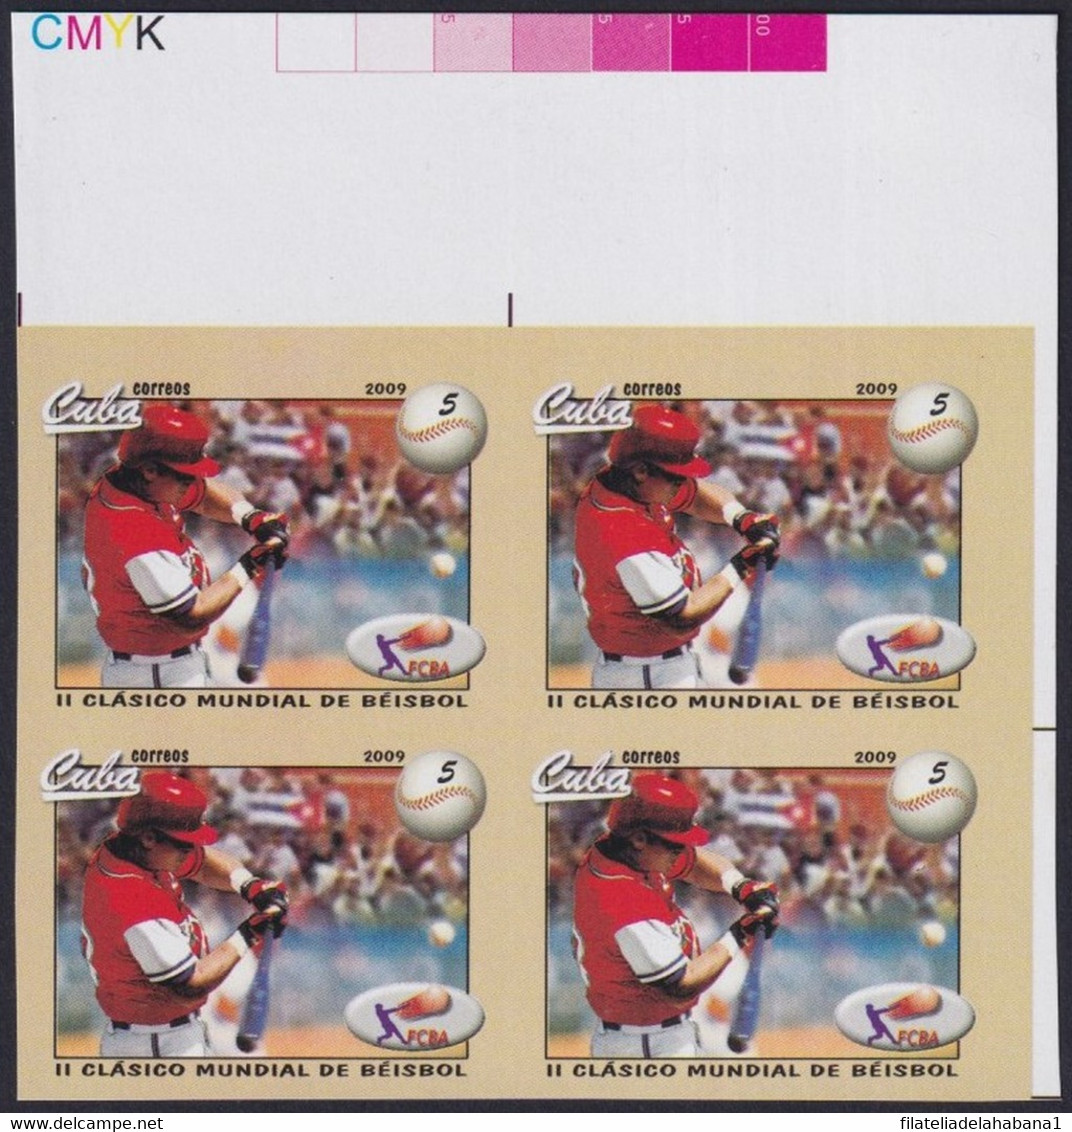 2009.467 CUBA 2009 5c MNH IMPERFORATED PROOF BASEBALL CLASSIC GAMES. - Imperforates, Proofs & Errors